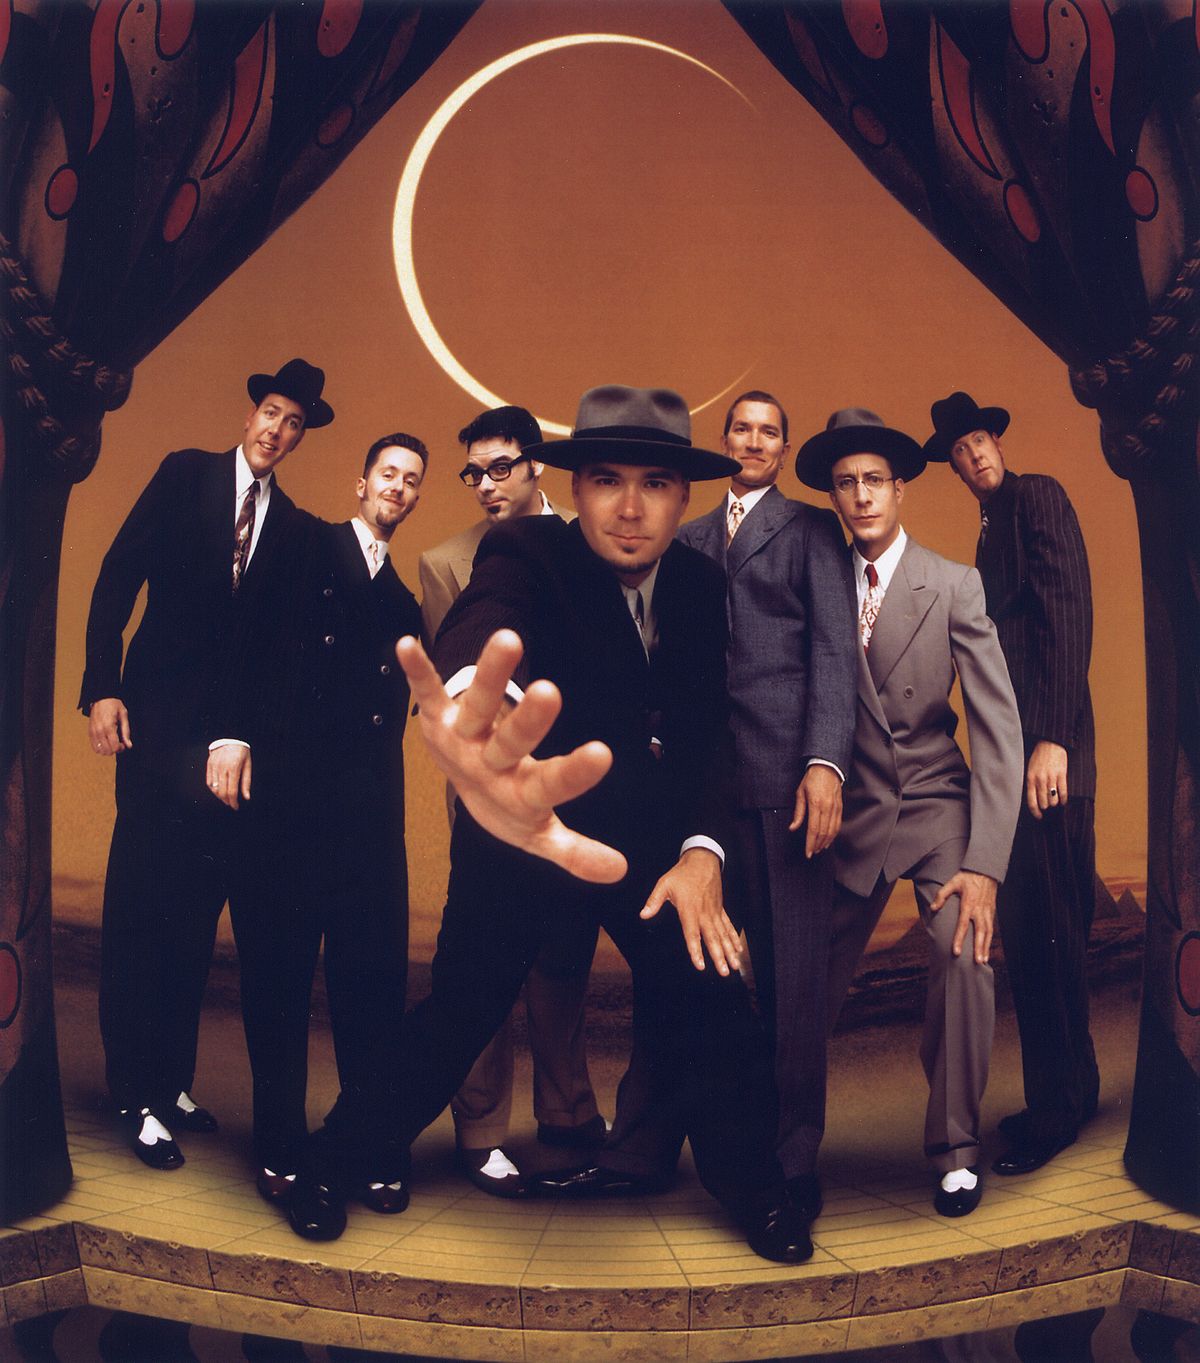 Big Bad Voodoo Daddy performs tonight at The Festival at Sandpoint. Their latest album is a tribute to Cab Calloway; their shows feature plenty of exuberant Calloway-style showmanship.